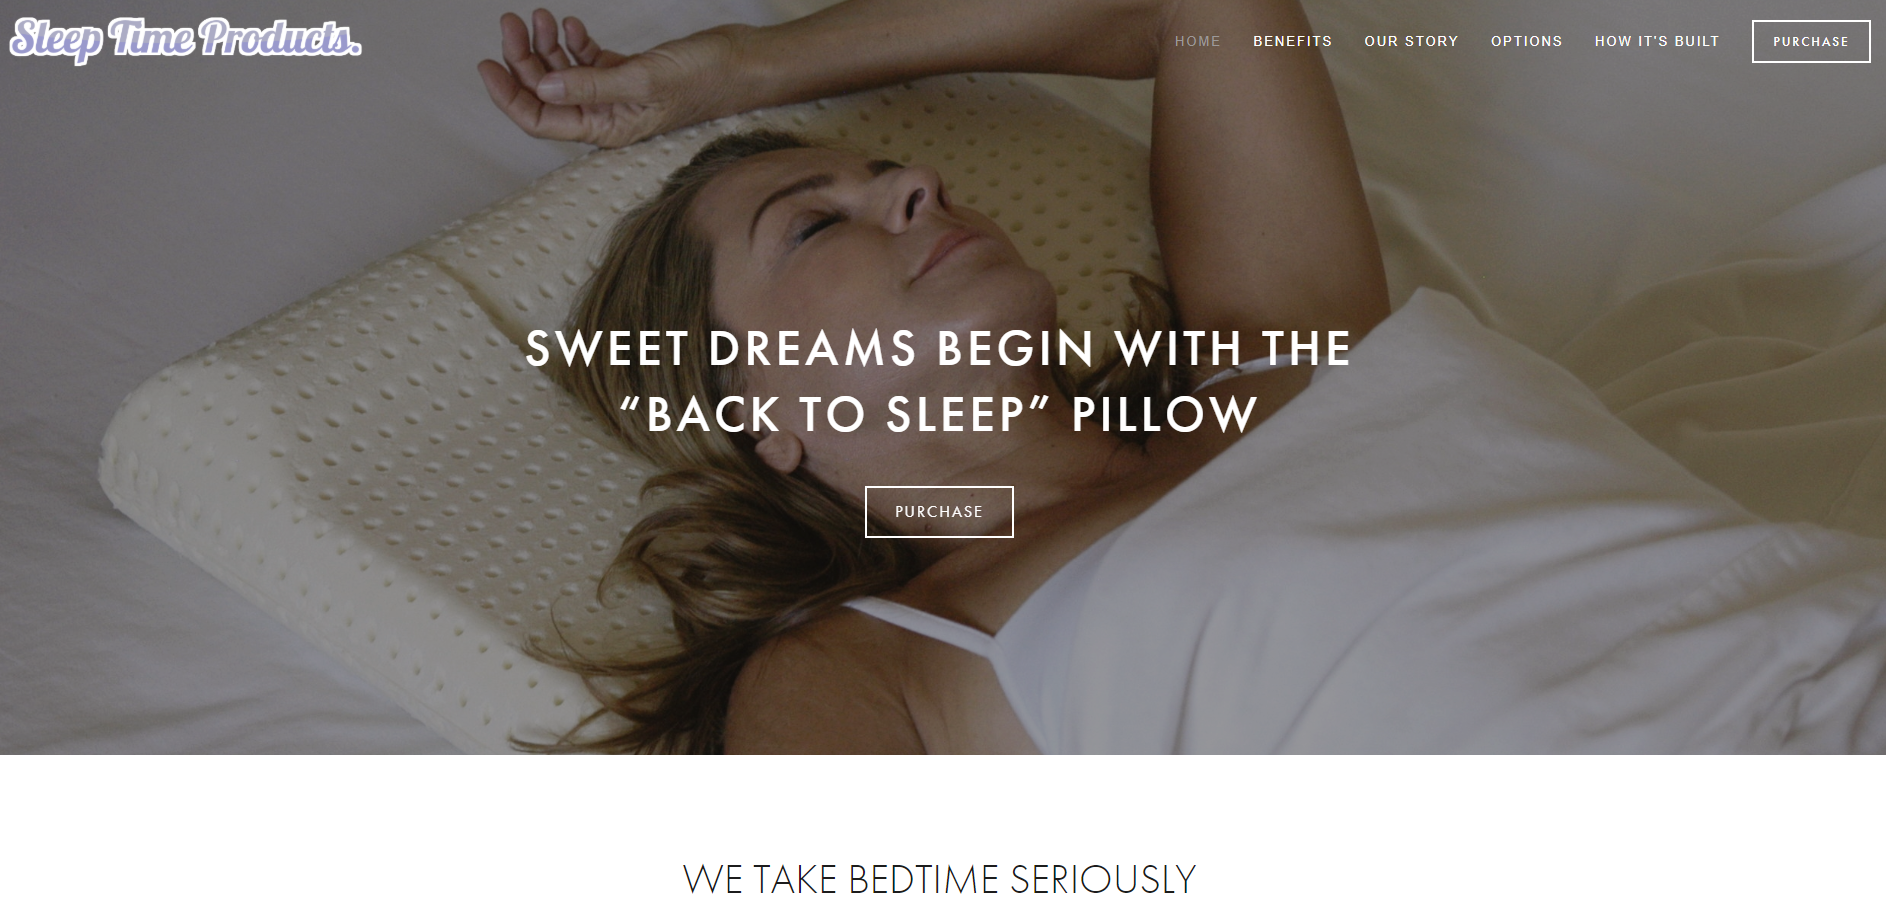 GoMarketing Inc. Hired By Sleep Time Products to Promote High-Tech Pillow